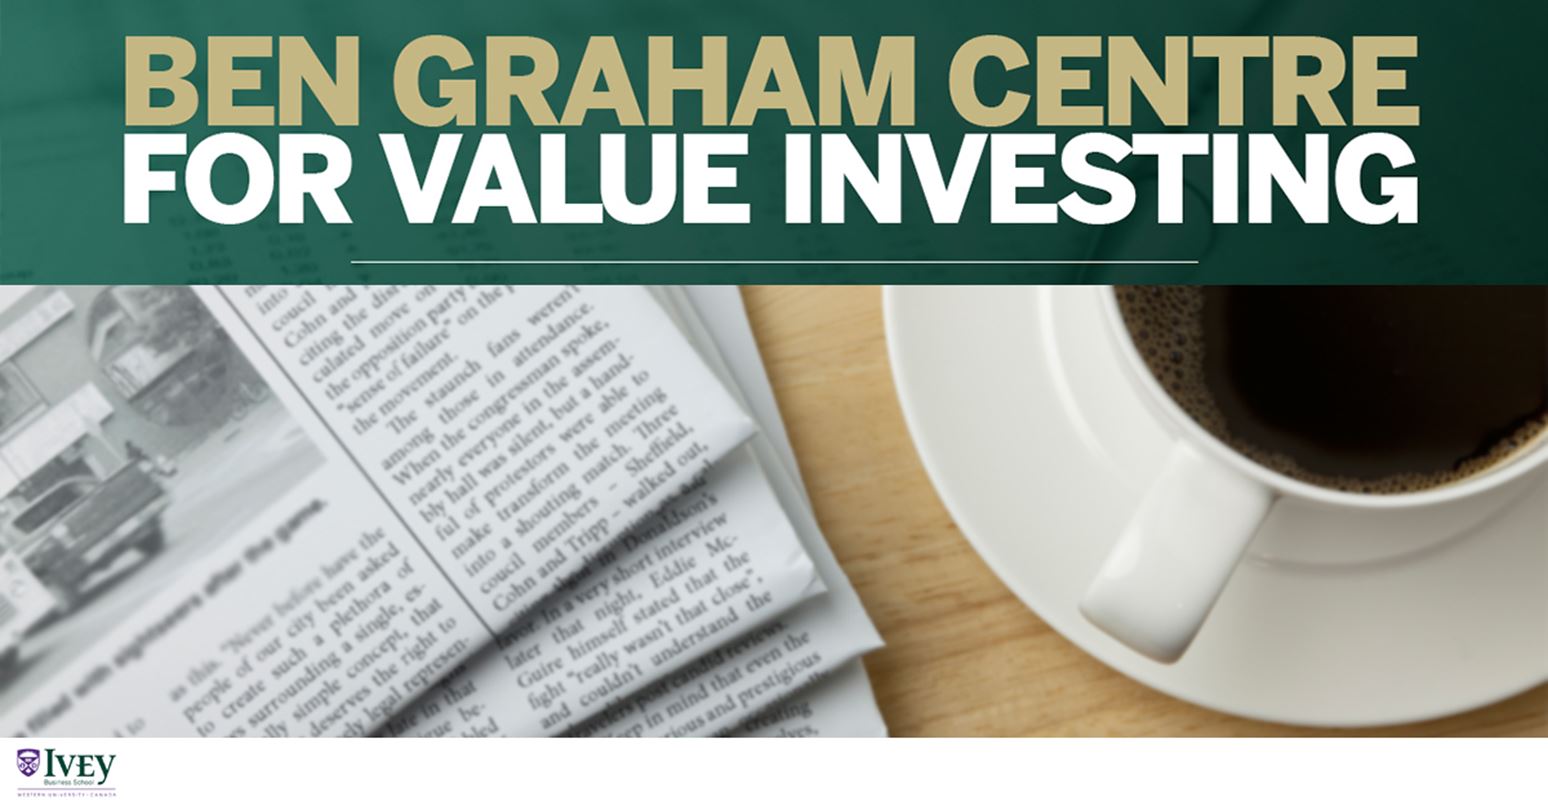 "Is value investing still relevant? Depends on your values"